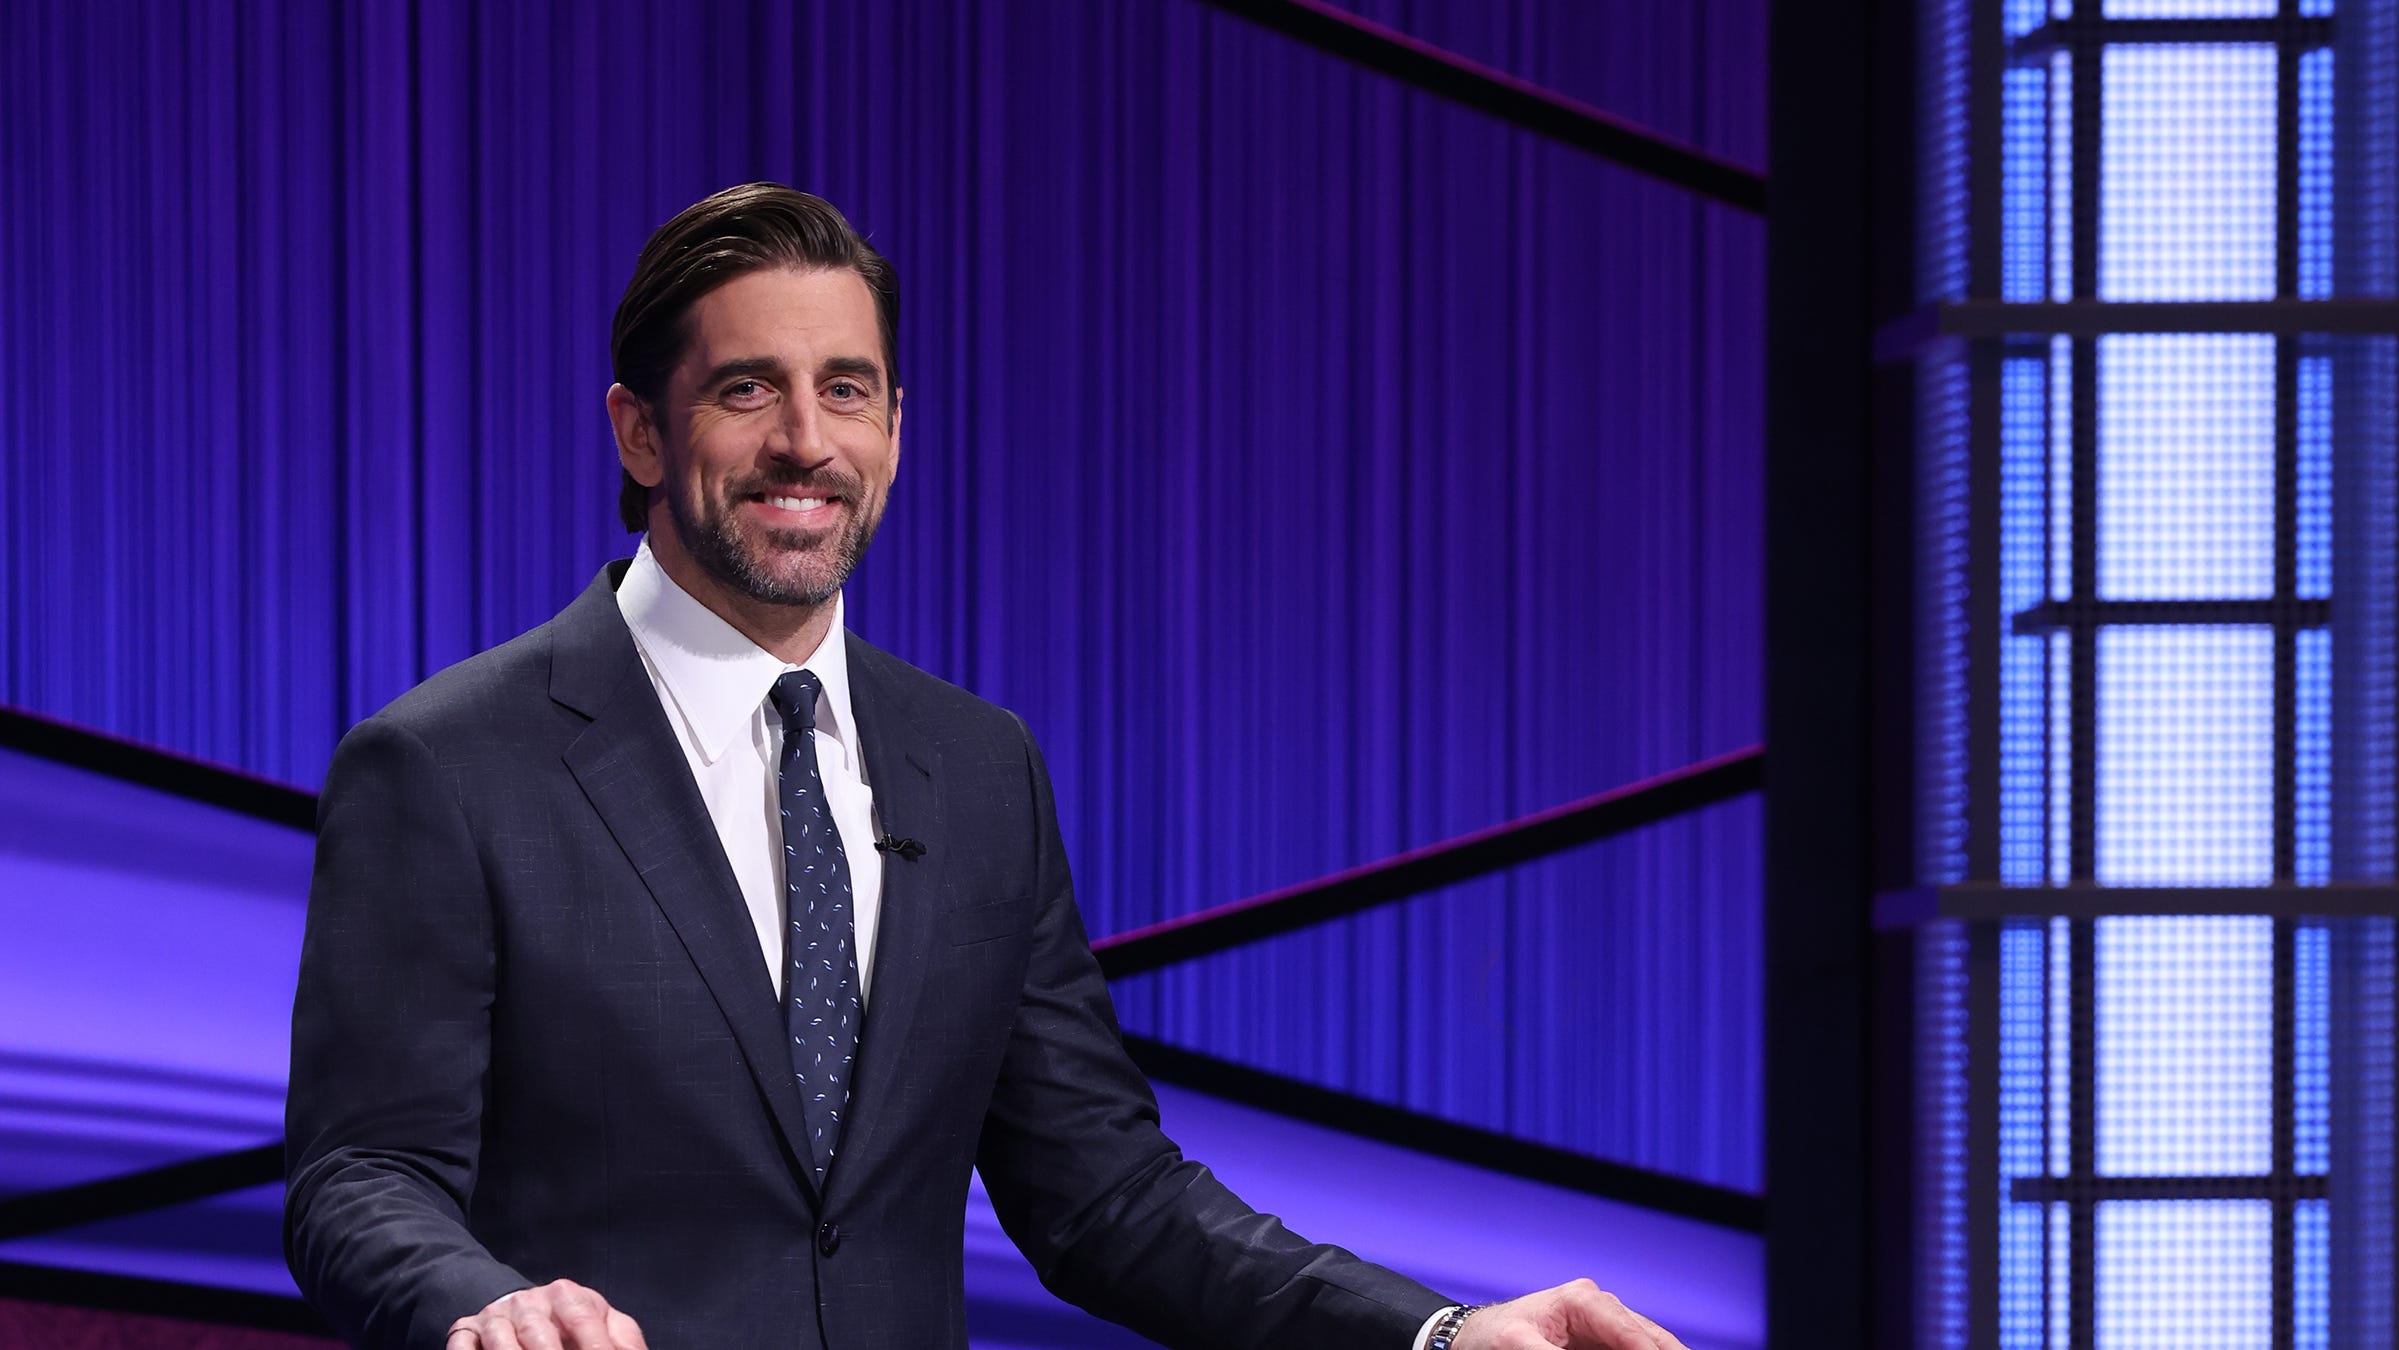 Night 2 of Aaron Rodgers on 'Jeopardy!': Turd Ferguson popped up and so did Michigan's Upper Peninsula - Green Bay Press Gazette